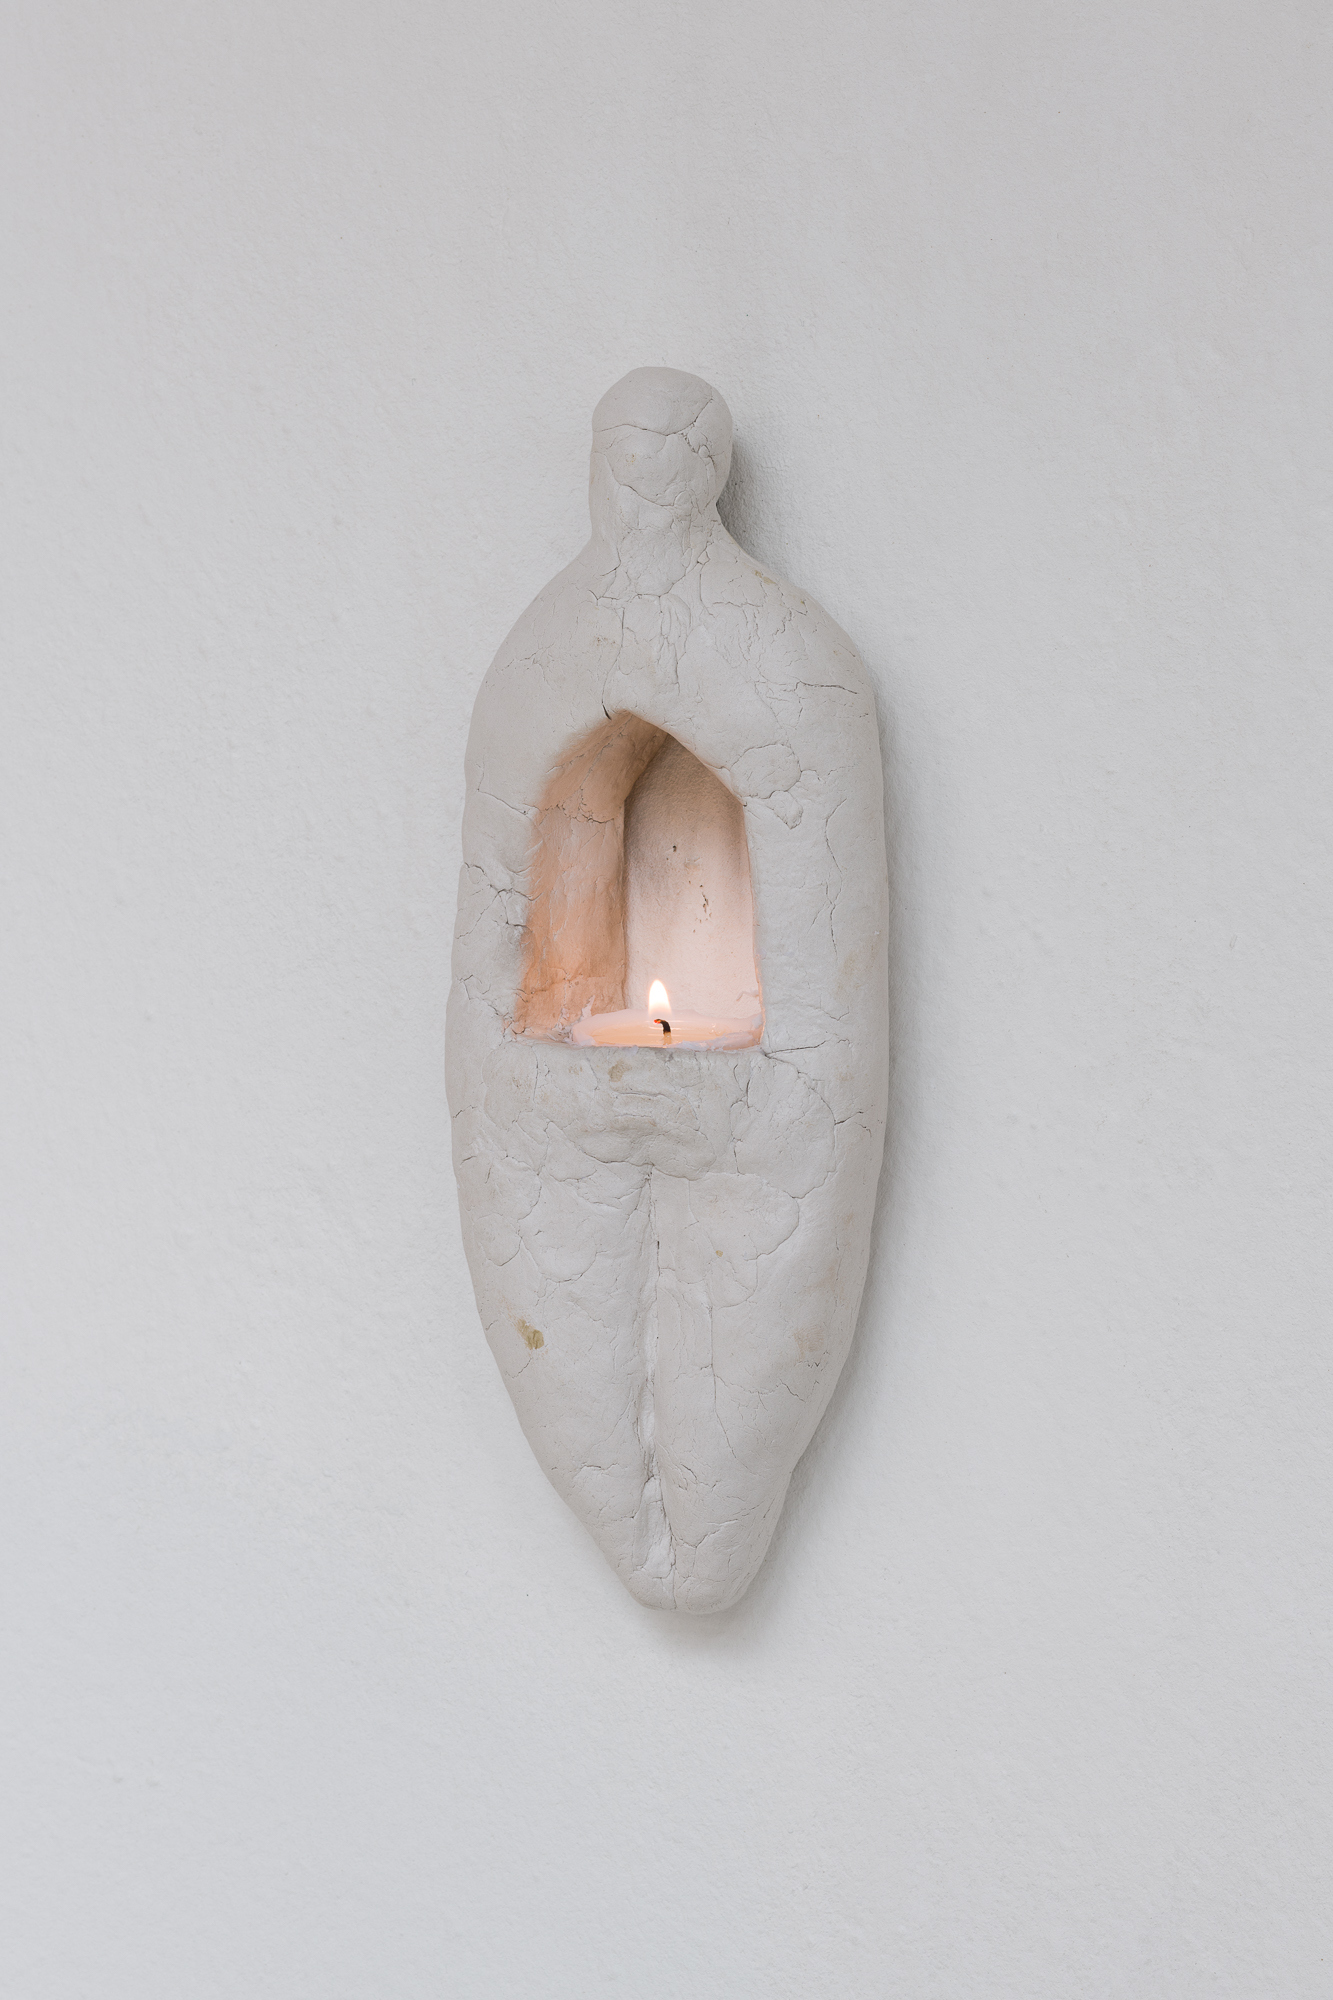 Belu-Simion Fainaru, Man with house and candle, 1991, plaster, candle, 20 x 8 x 3 cm; Photo: Trevor Good; Courtesy the artist and Plan B Cluj, Berlin